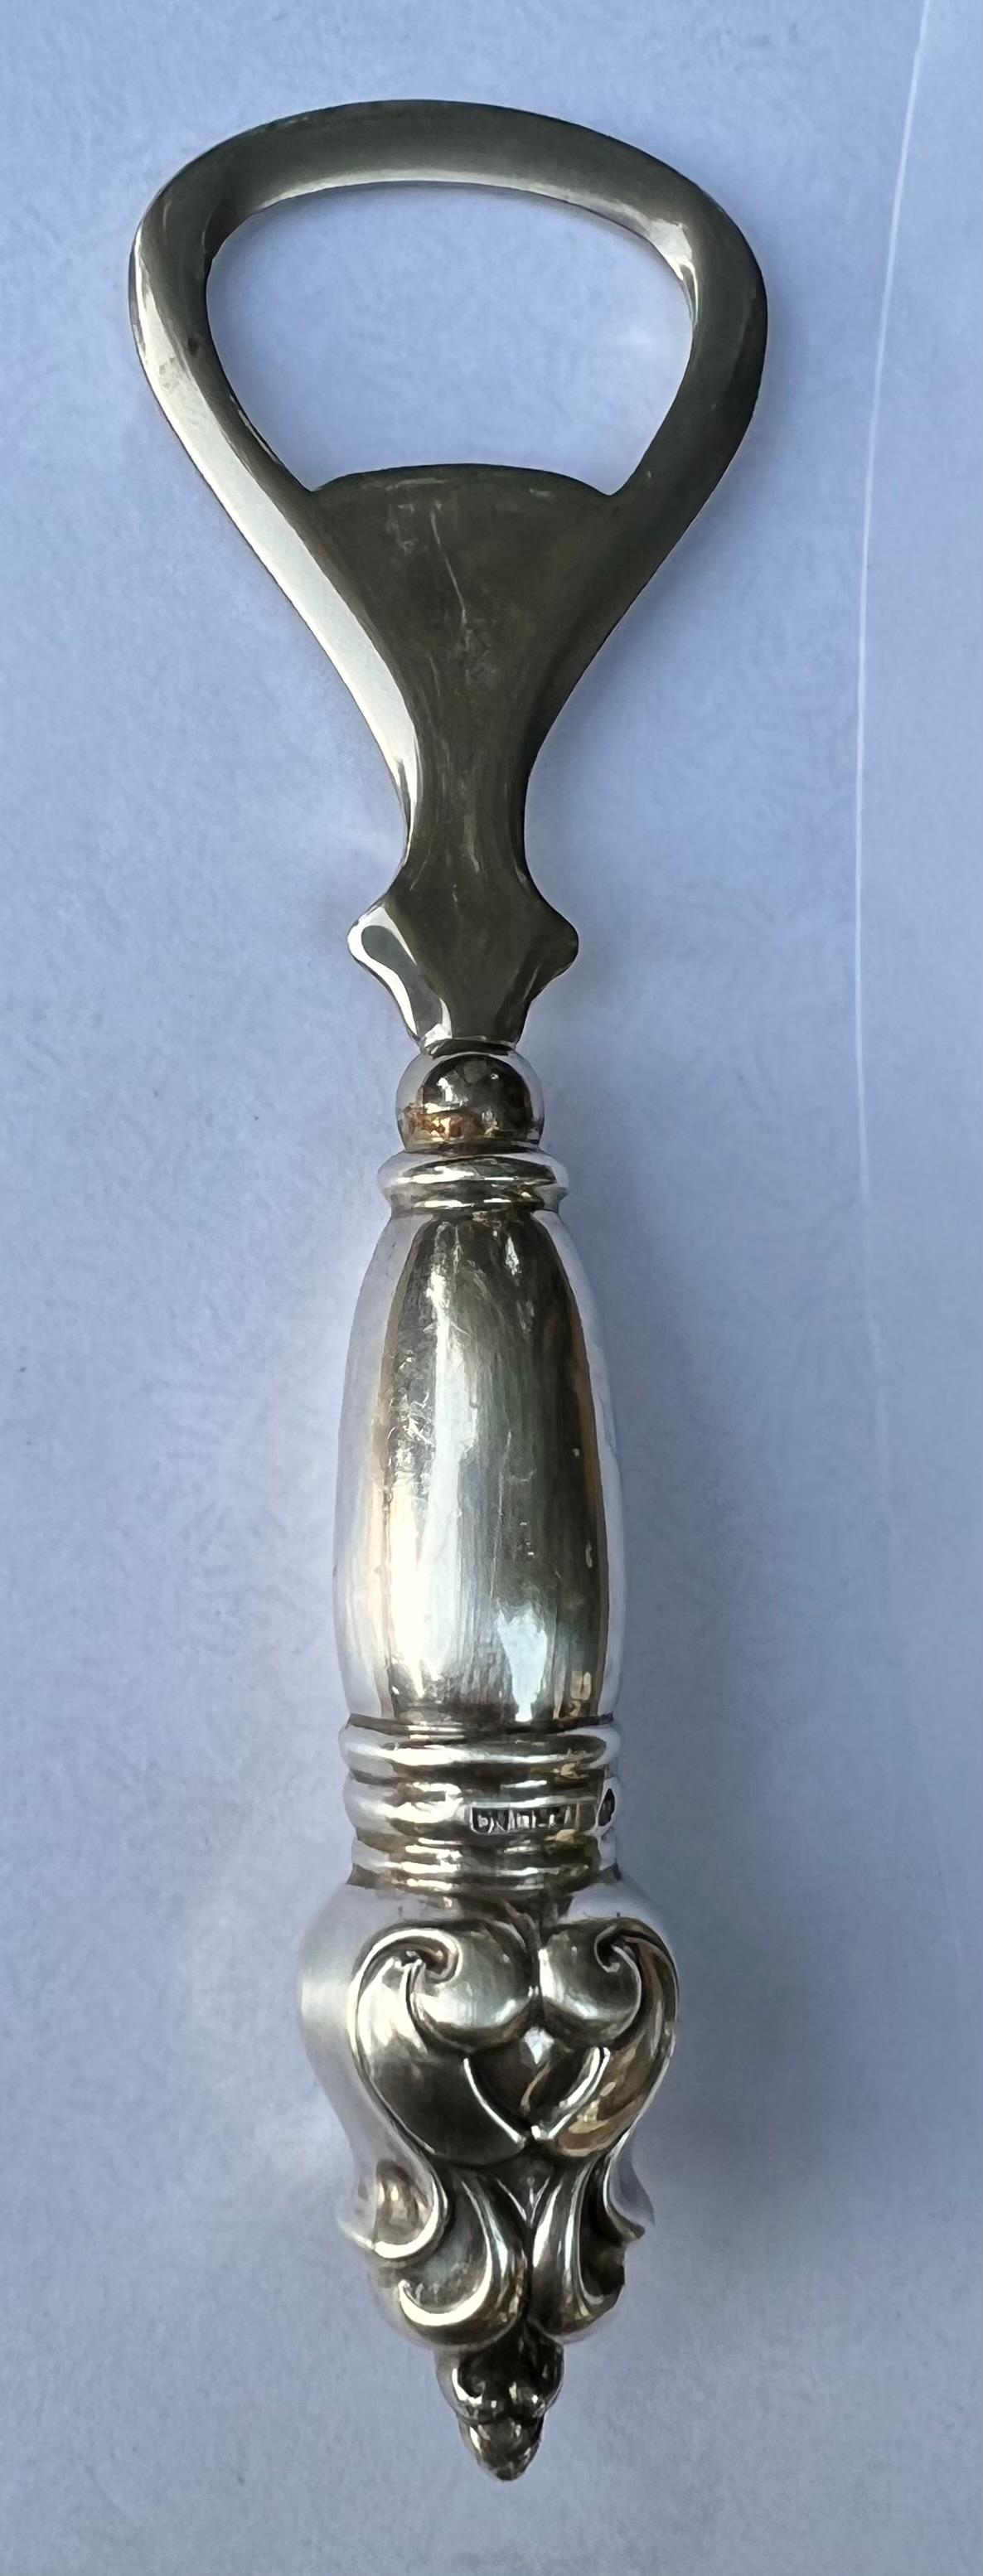 Simpson Hall Miller Sterling Silver Stainless Bottle Opener with Weighted Handle. Marked NX6. Bring sophistication to any bar and open bottles with style and ease. Makes a lovely gift. 

Simpson Hall Miller was taken over by International Silver